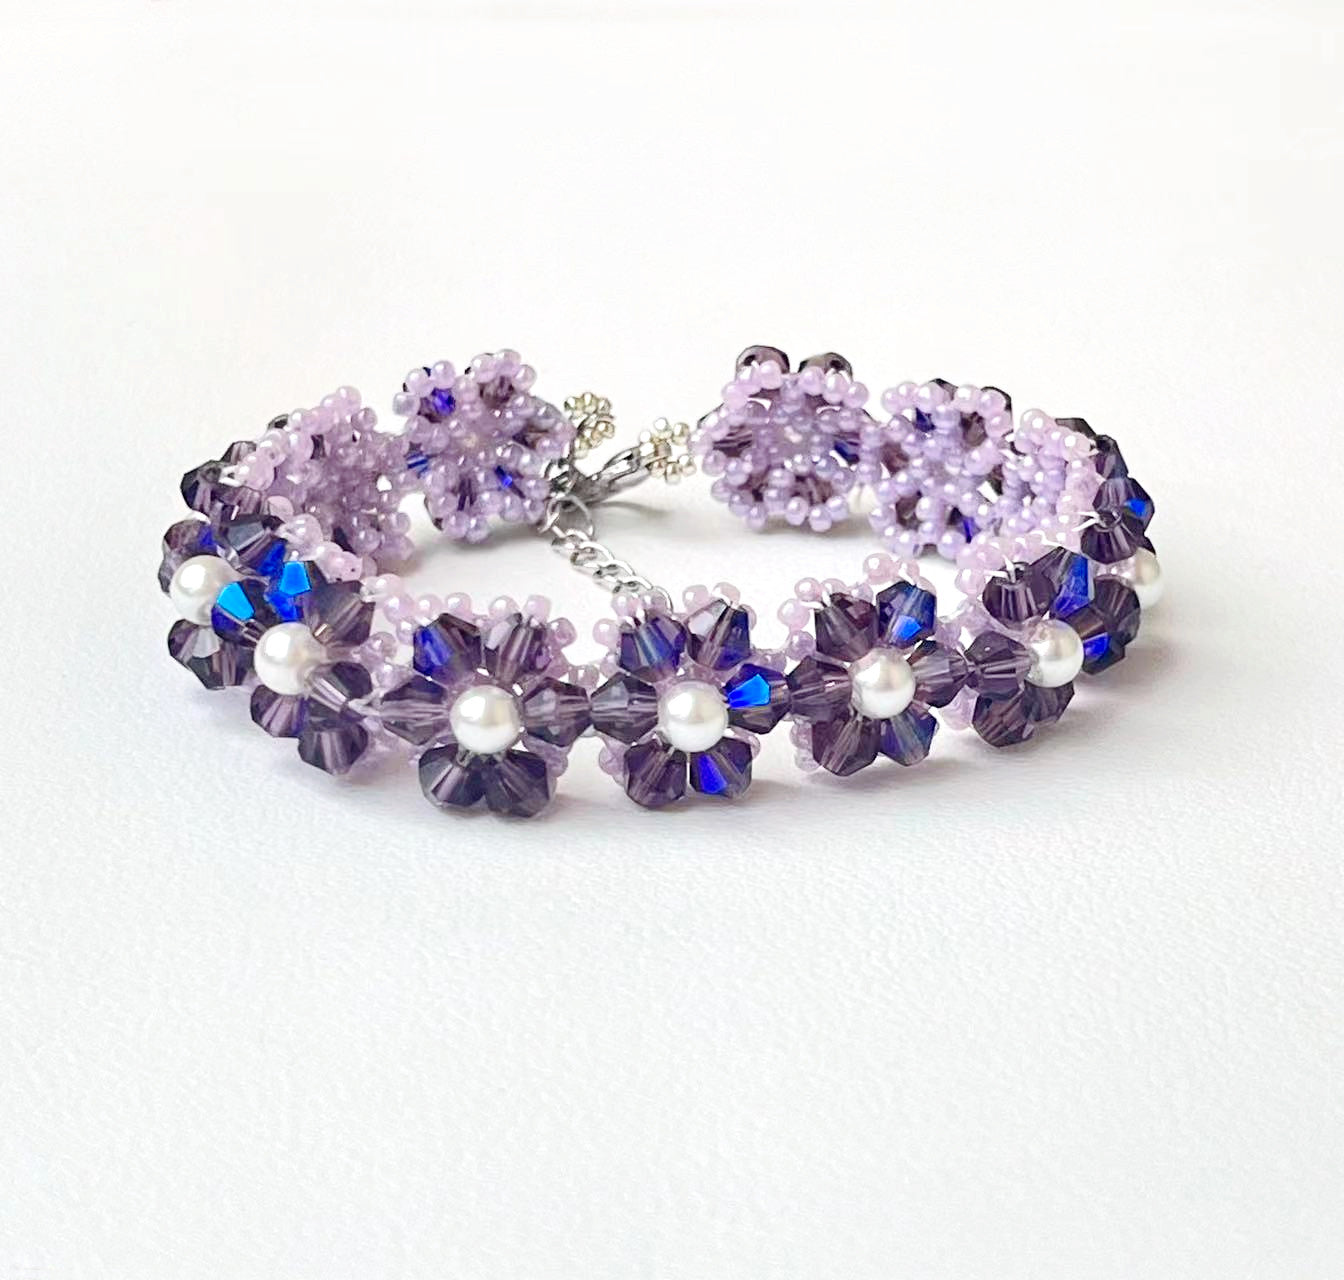 Handcrafted Crystal Bead Jewelry Inspired by Nature